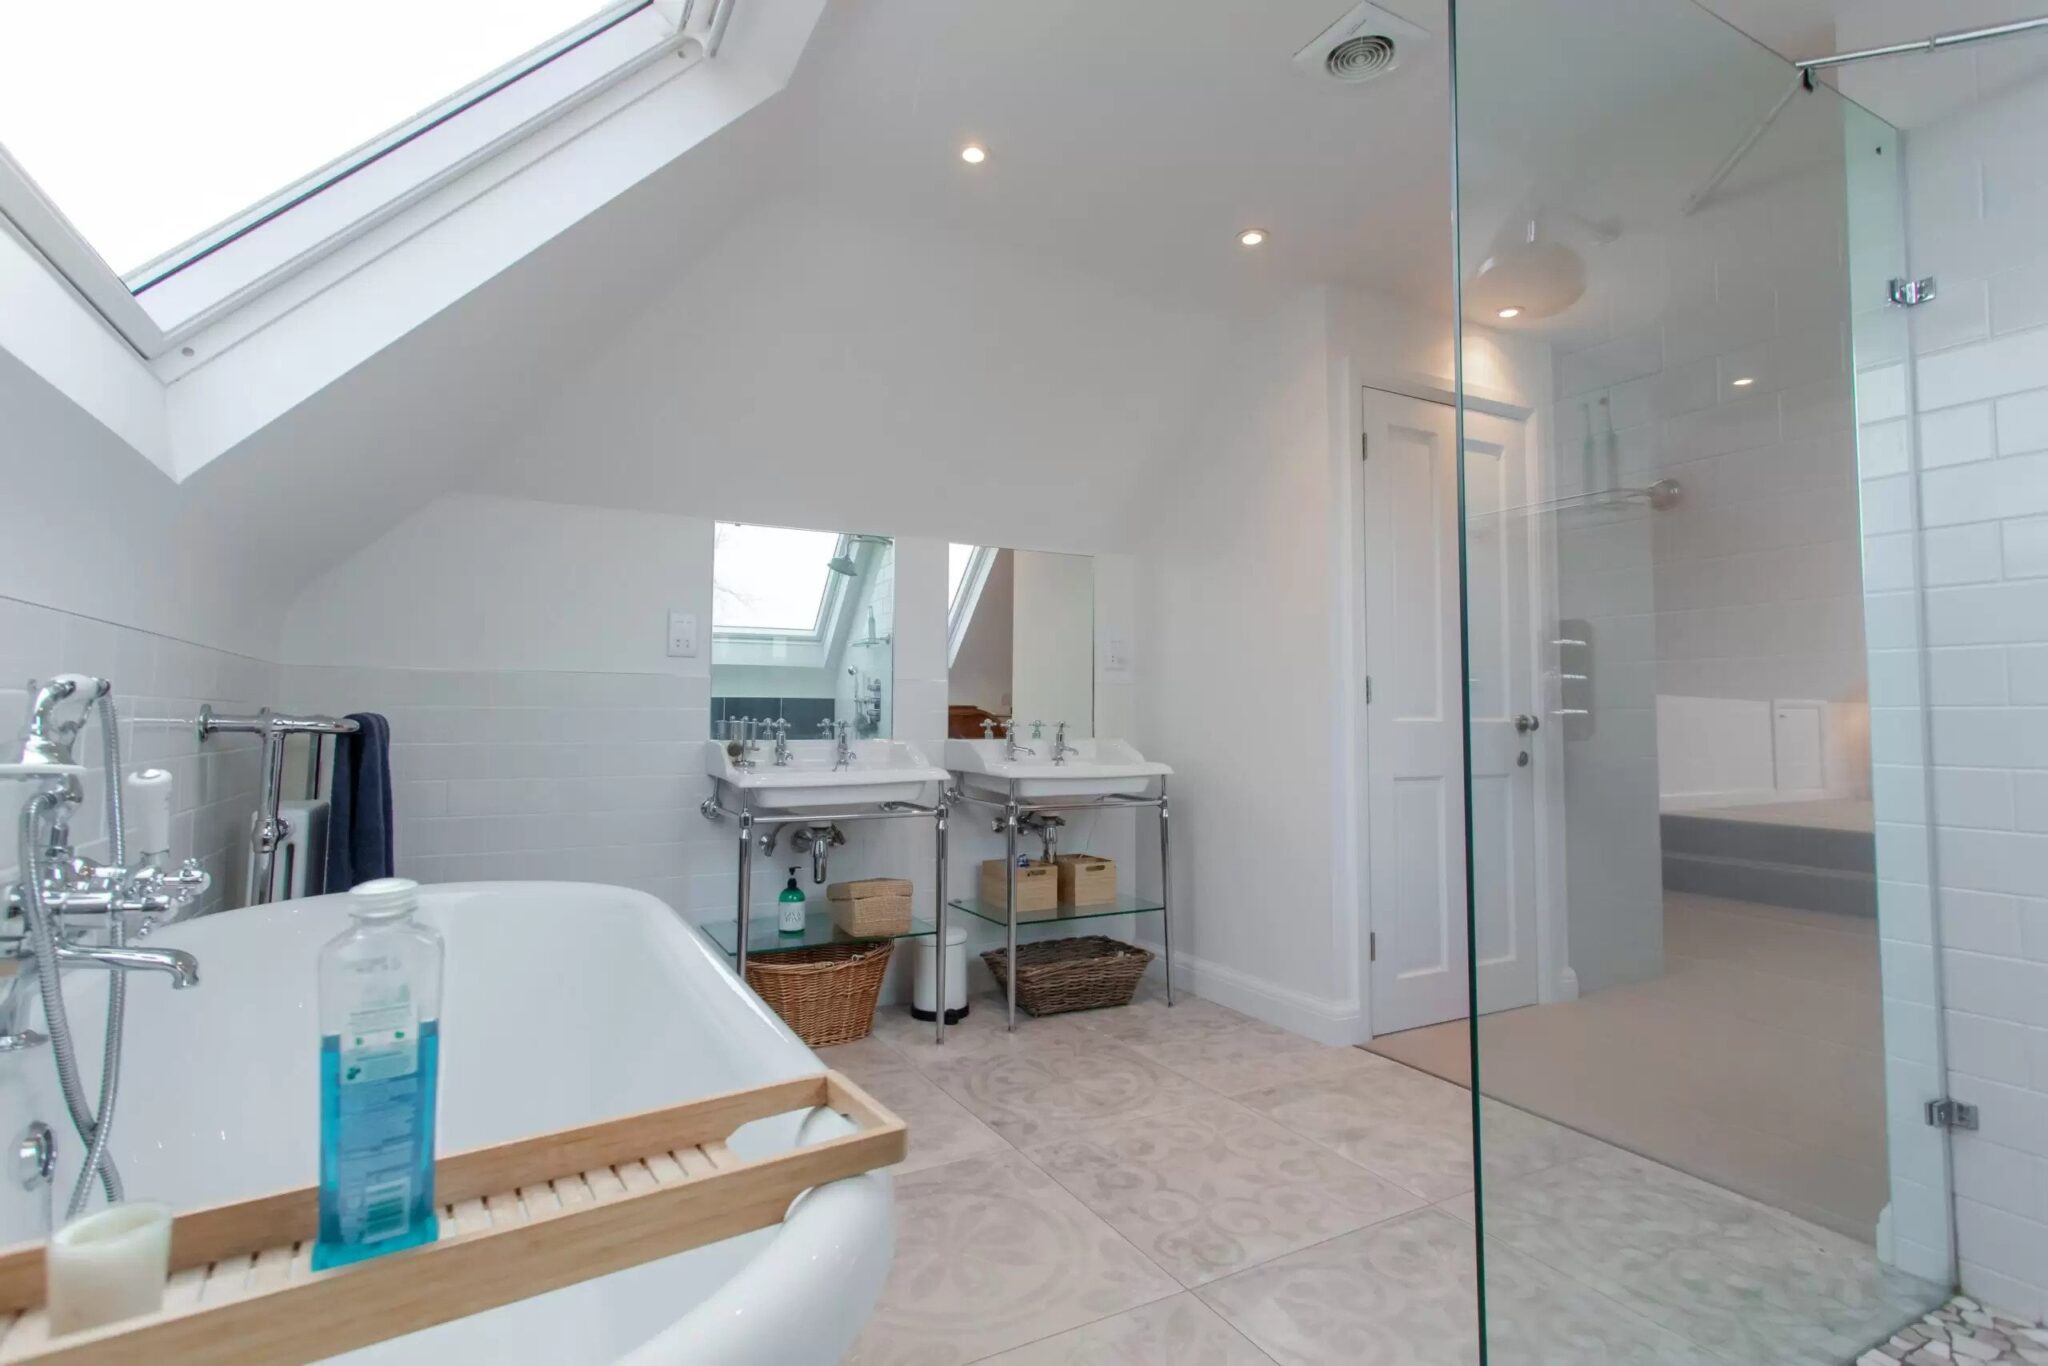 What Are The Benefits Of Loft Conversions?